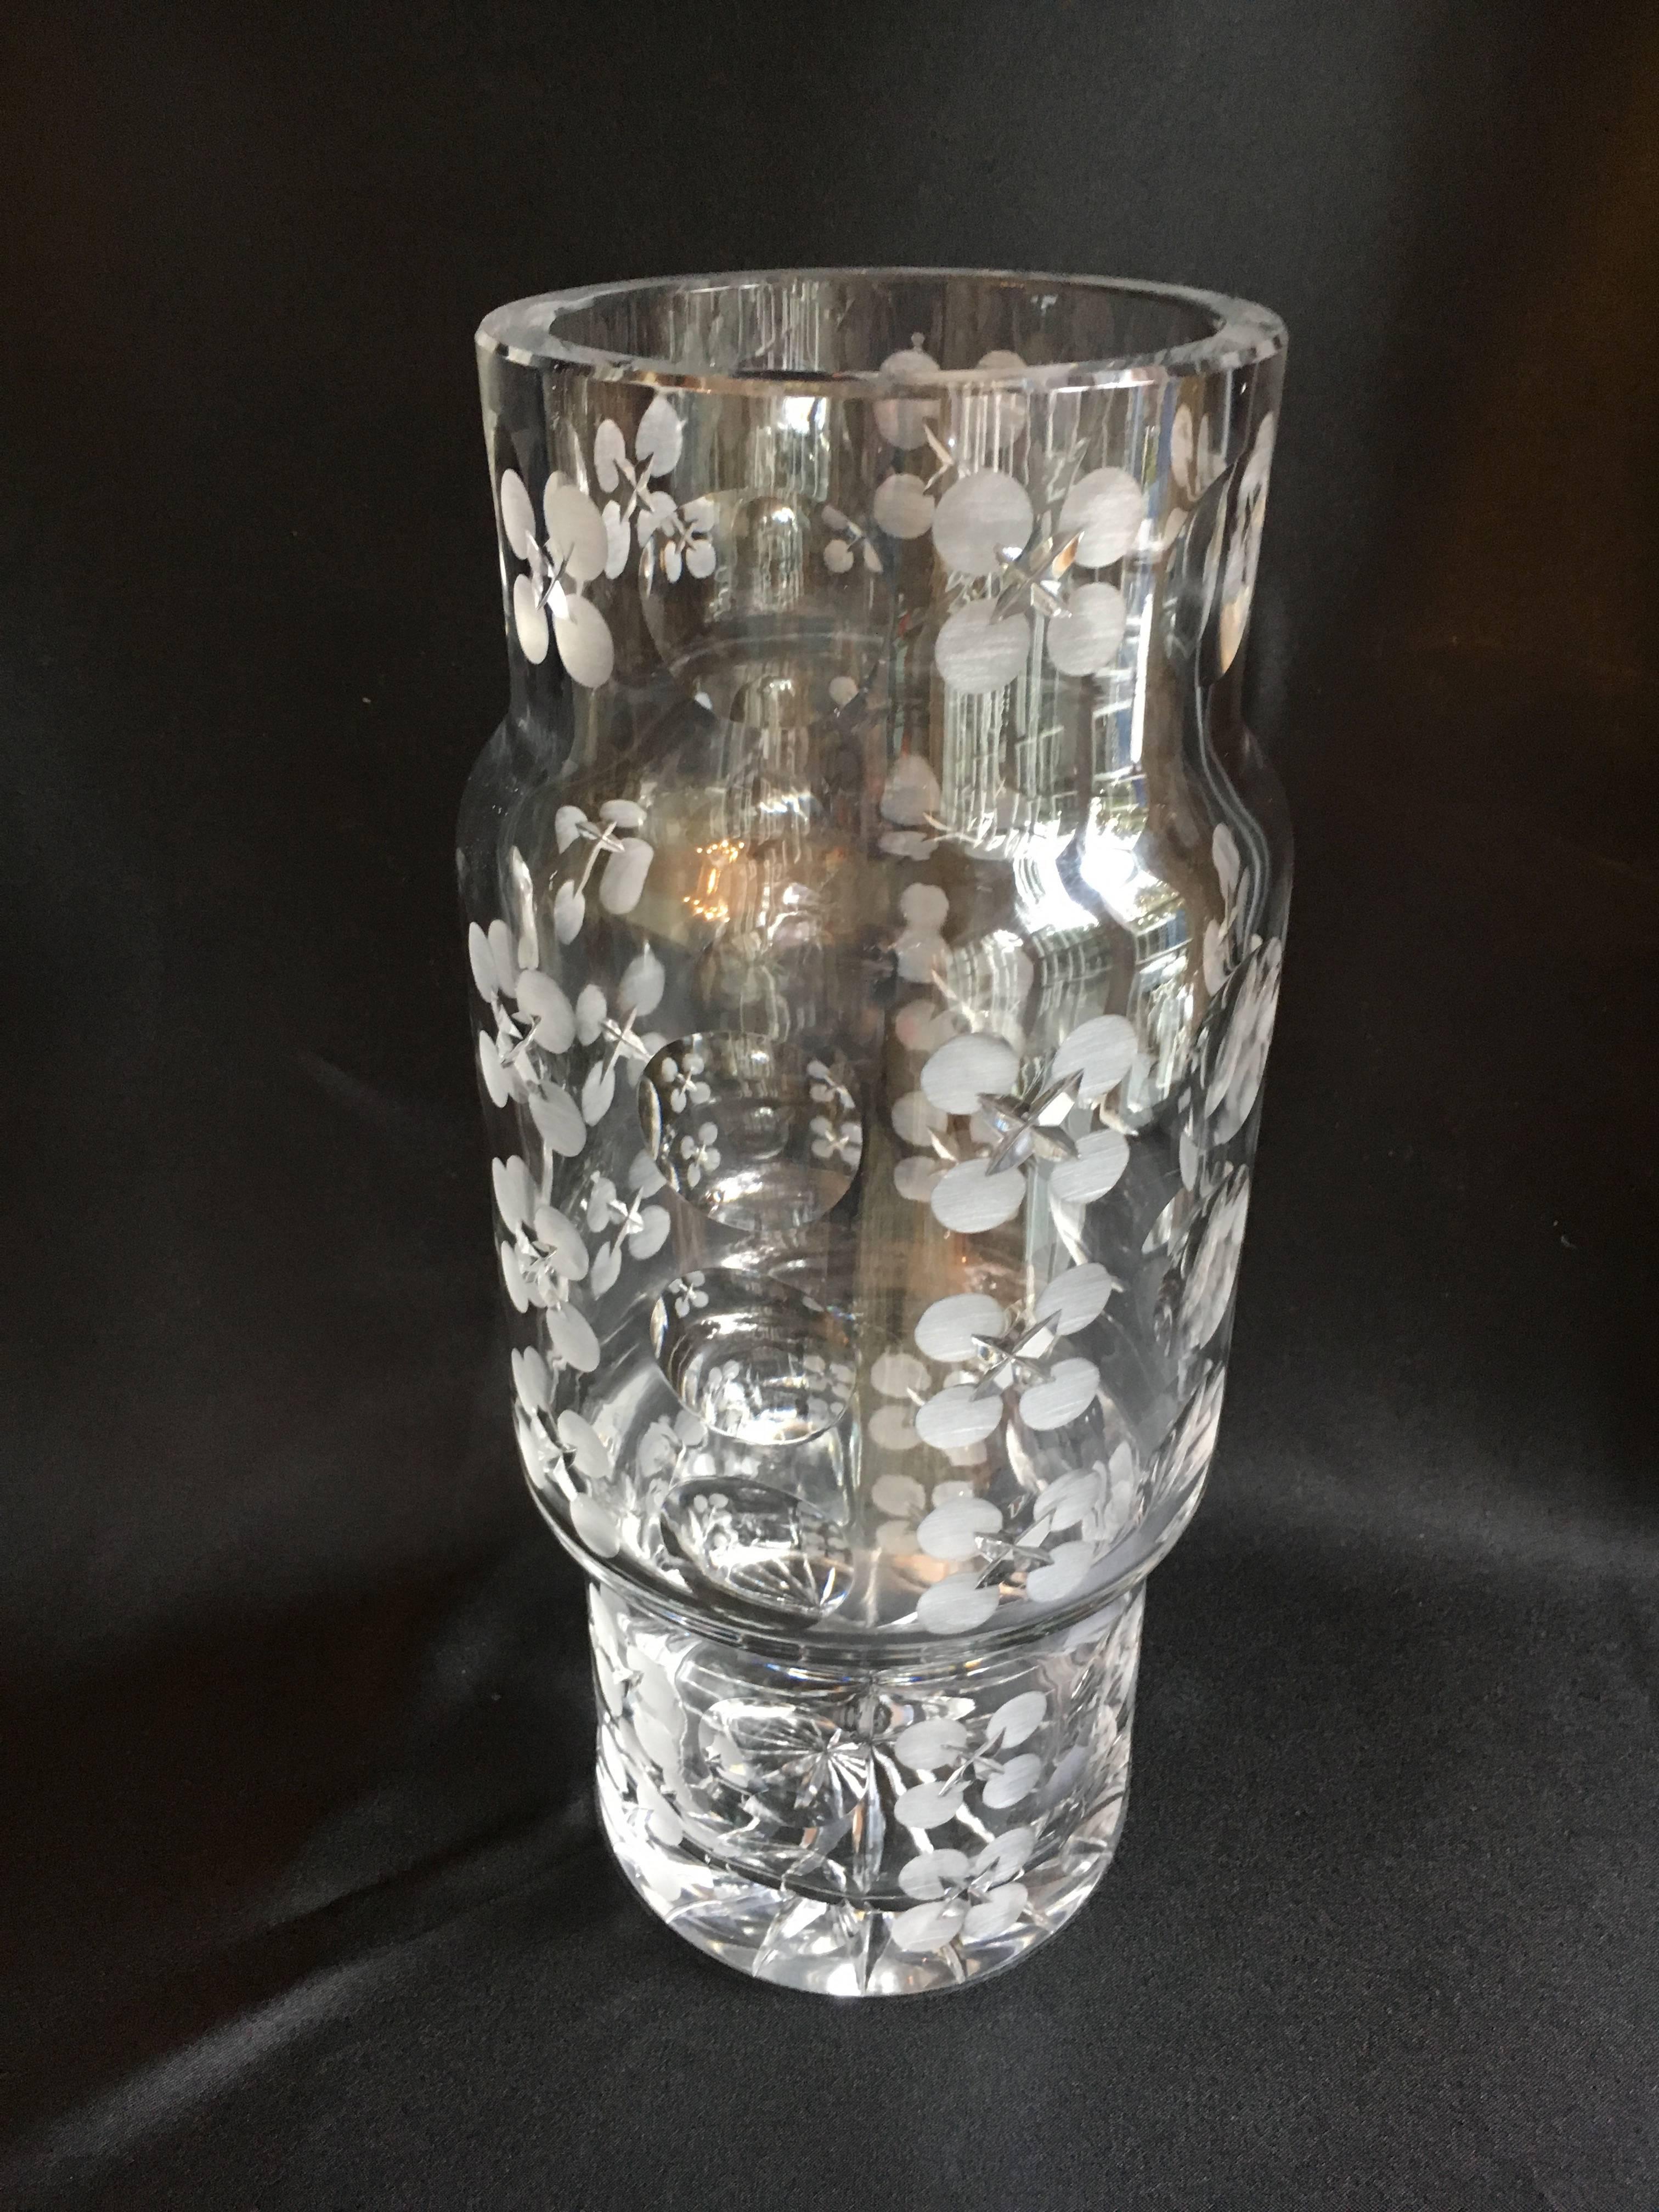 Modern crystal cylinder vase, the vintage beauty is not only stunning but heavy enough to hold the most magnificent branches and flowers, sturdy and large at 13